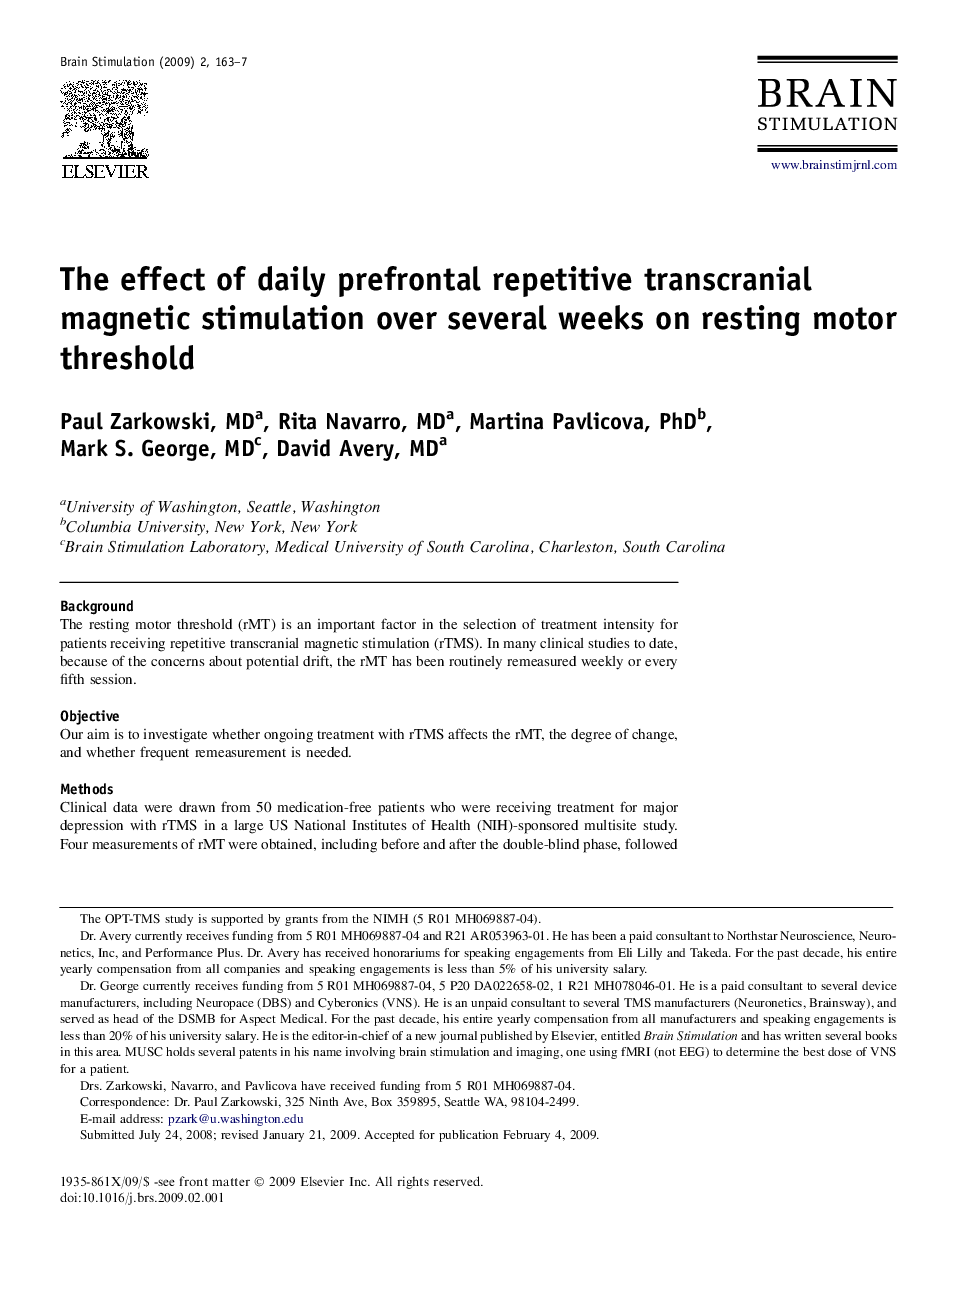 The effect of daily prefrontal repetitive transcranial magnetic stimulation over several weeks on resting motor threshold